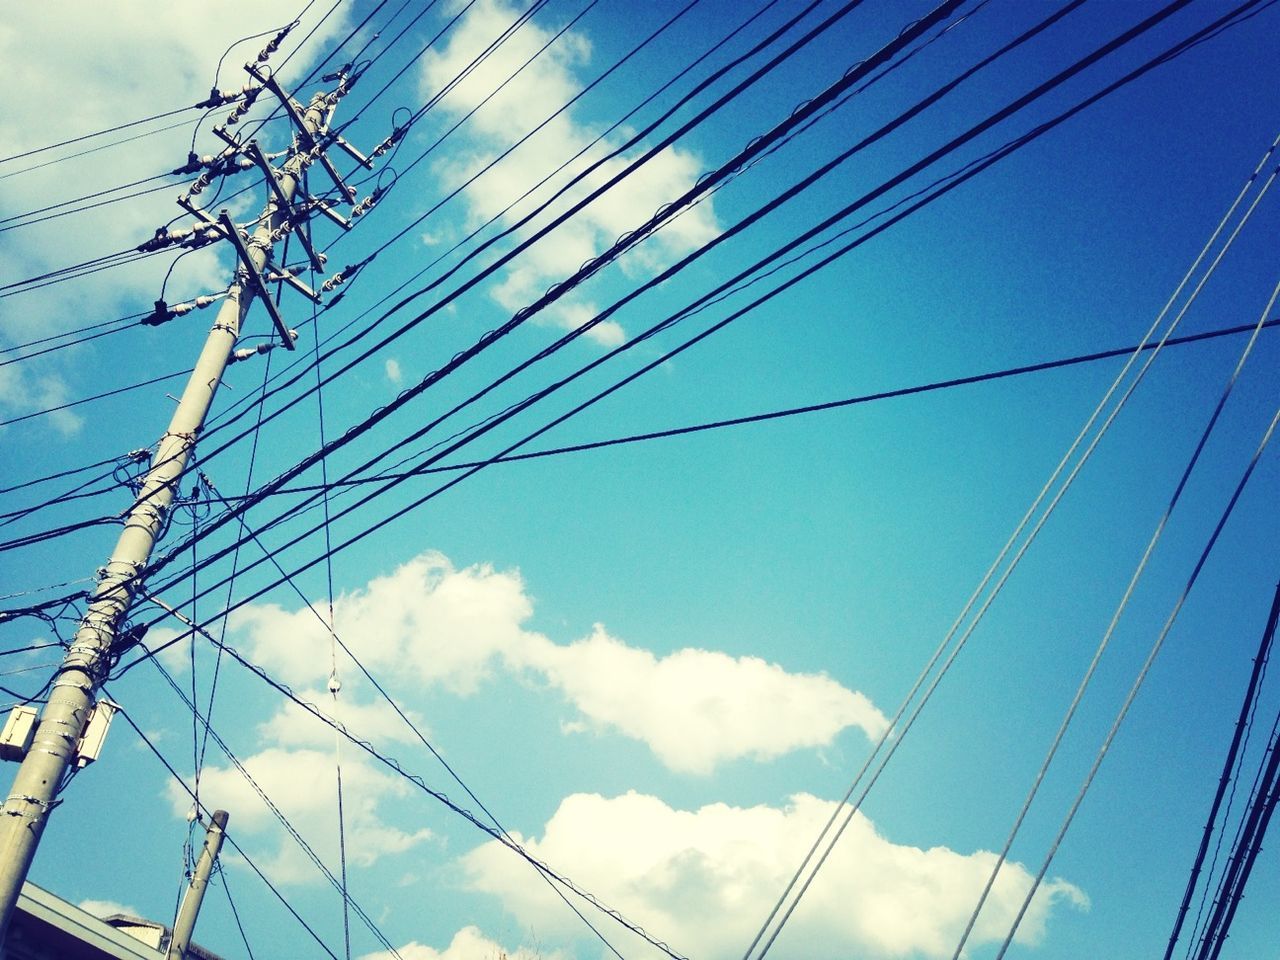 power line, electricity, cable, power supply, low angle view, electricity pylon, connection, sky, fuel and power generation, technology, power cable, blue, complexity, cloud - sky, cloud, outdoors, wire, no people, day, telephone pole